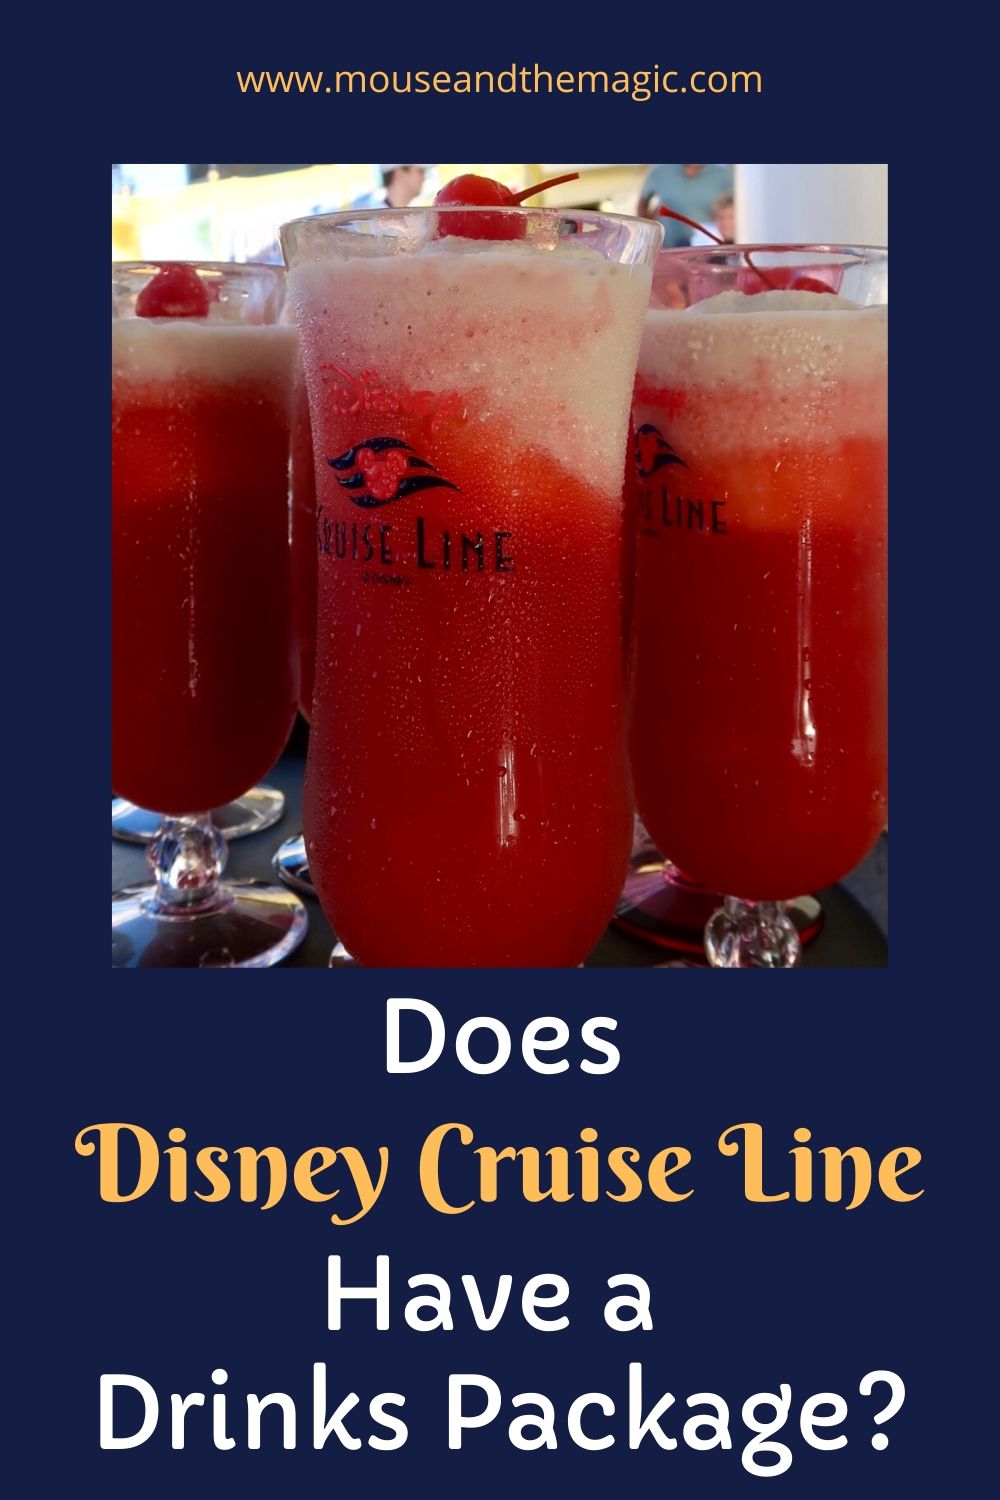 Does Disney Cruise Line Have a Drinks Package?